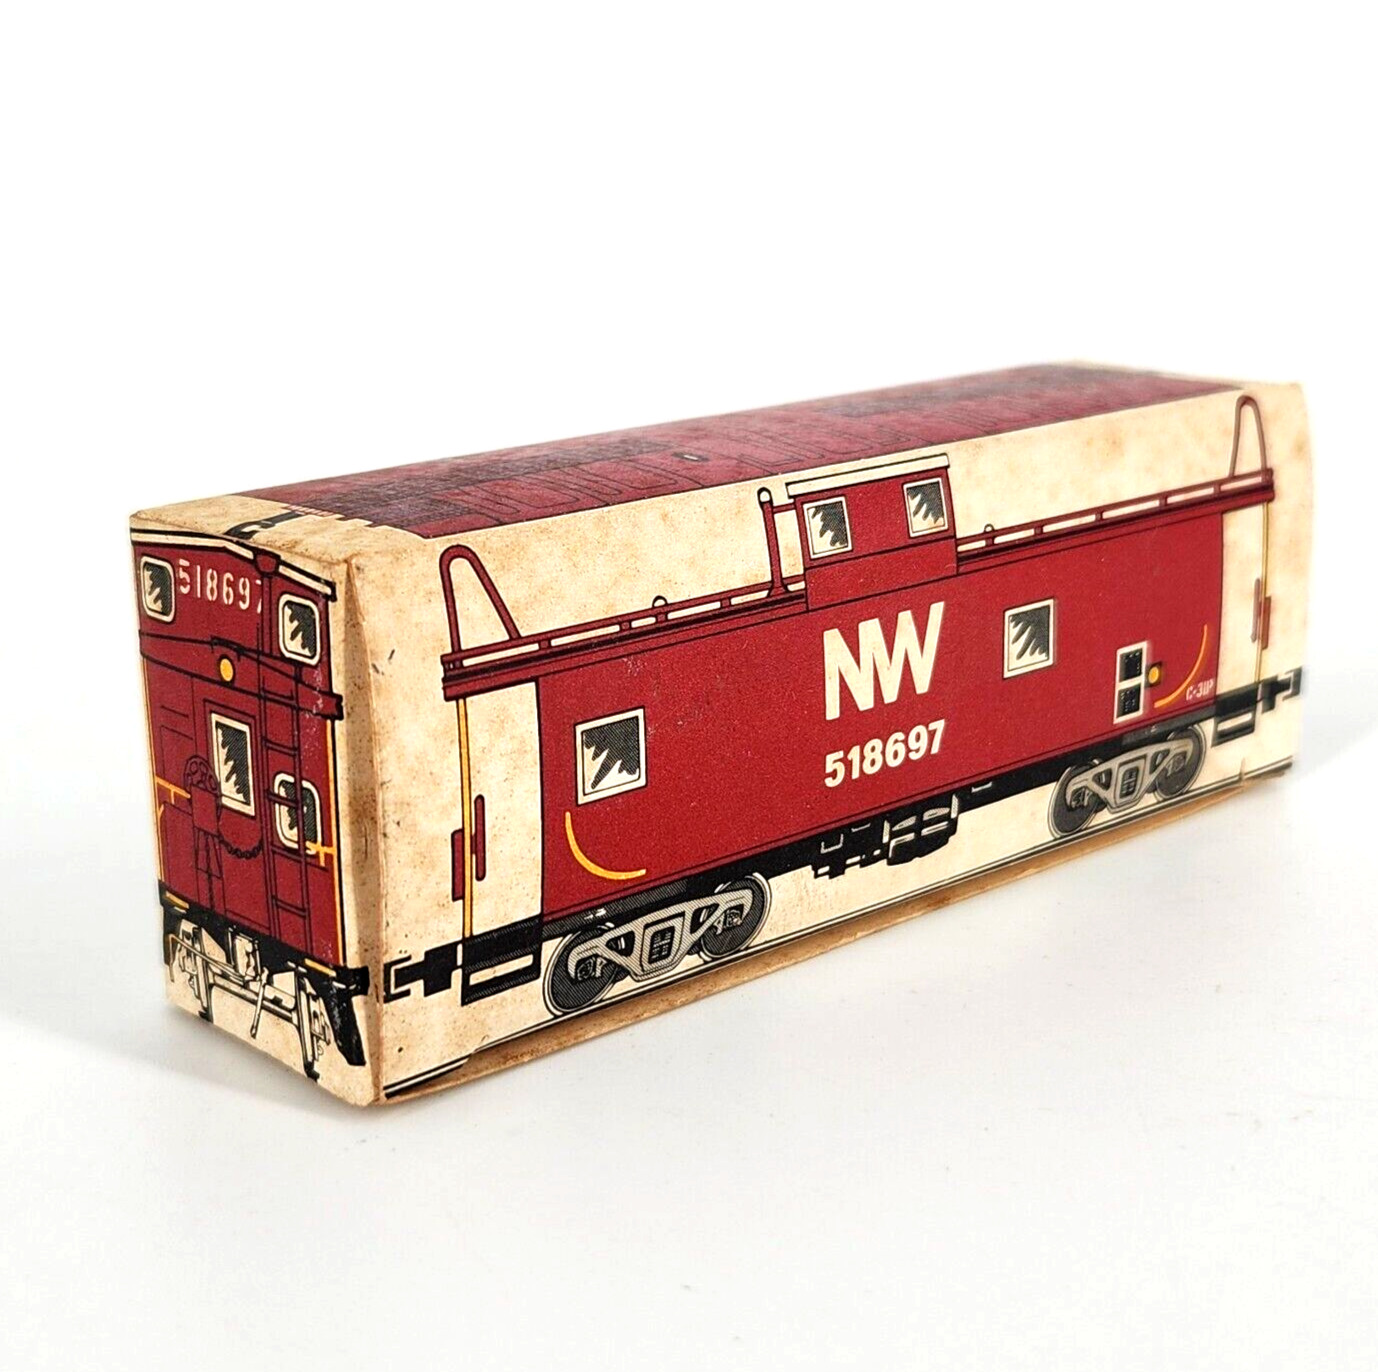 NW Norfolk & Western Railroad Caboose Freight Car Box of Matches: No Stopping Us